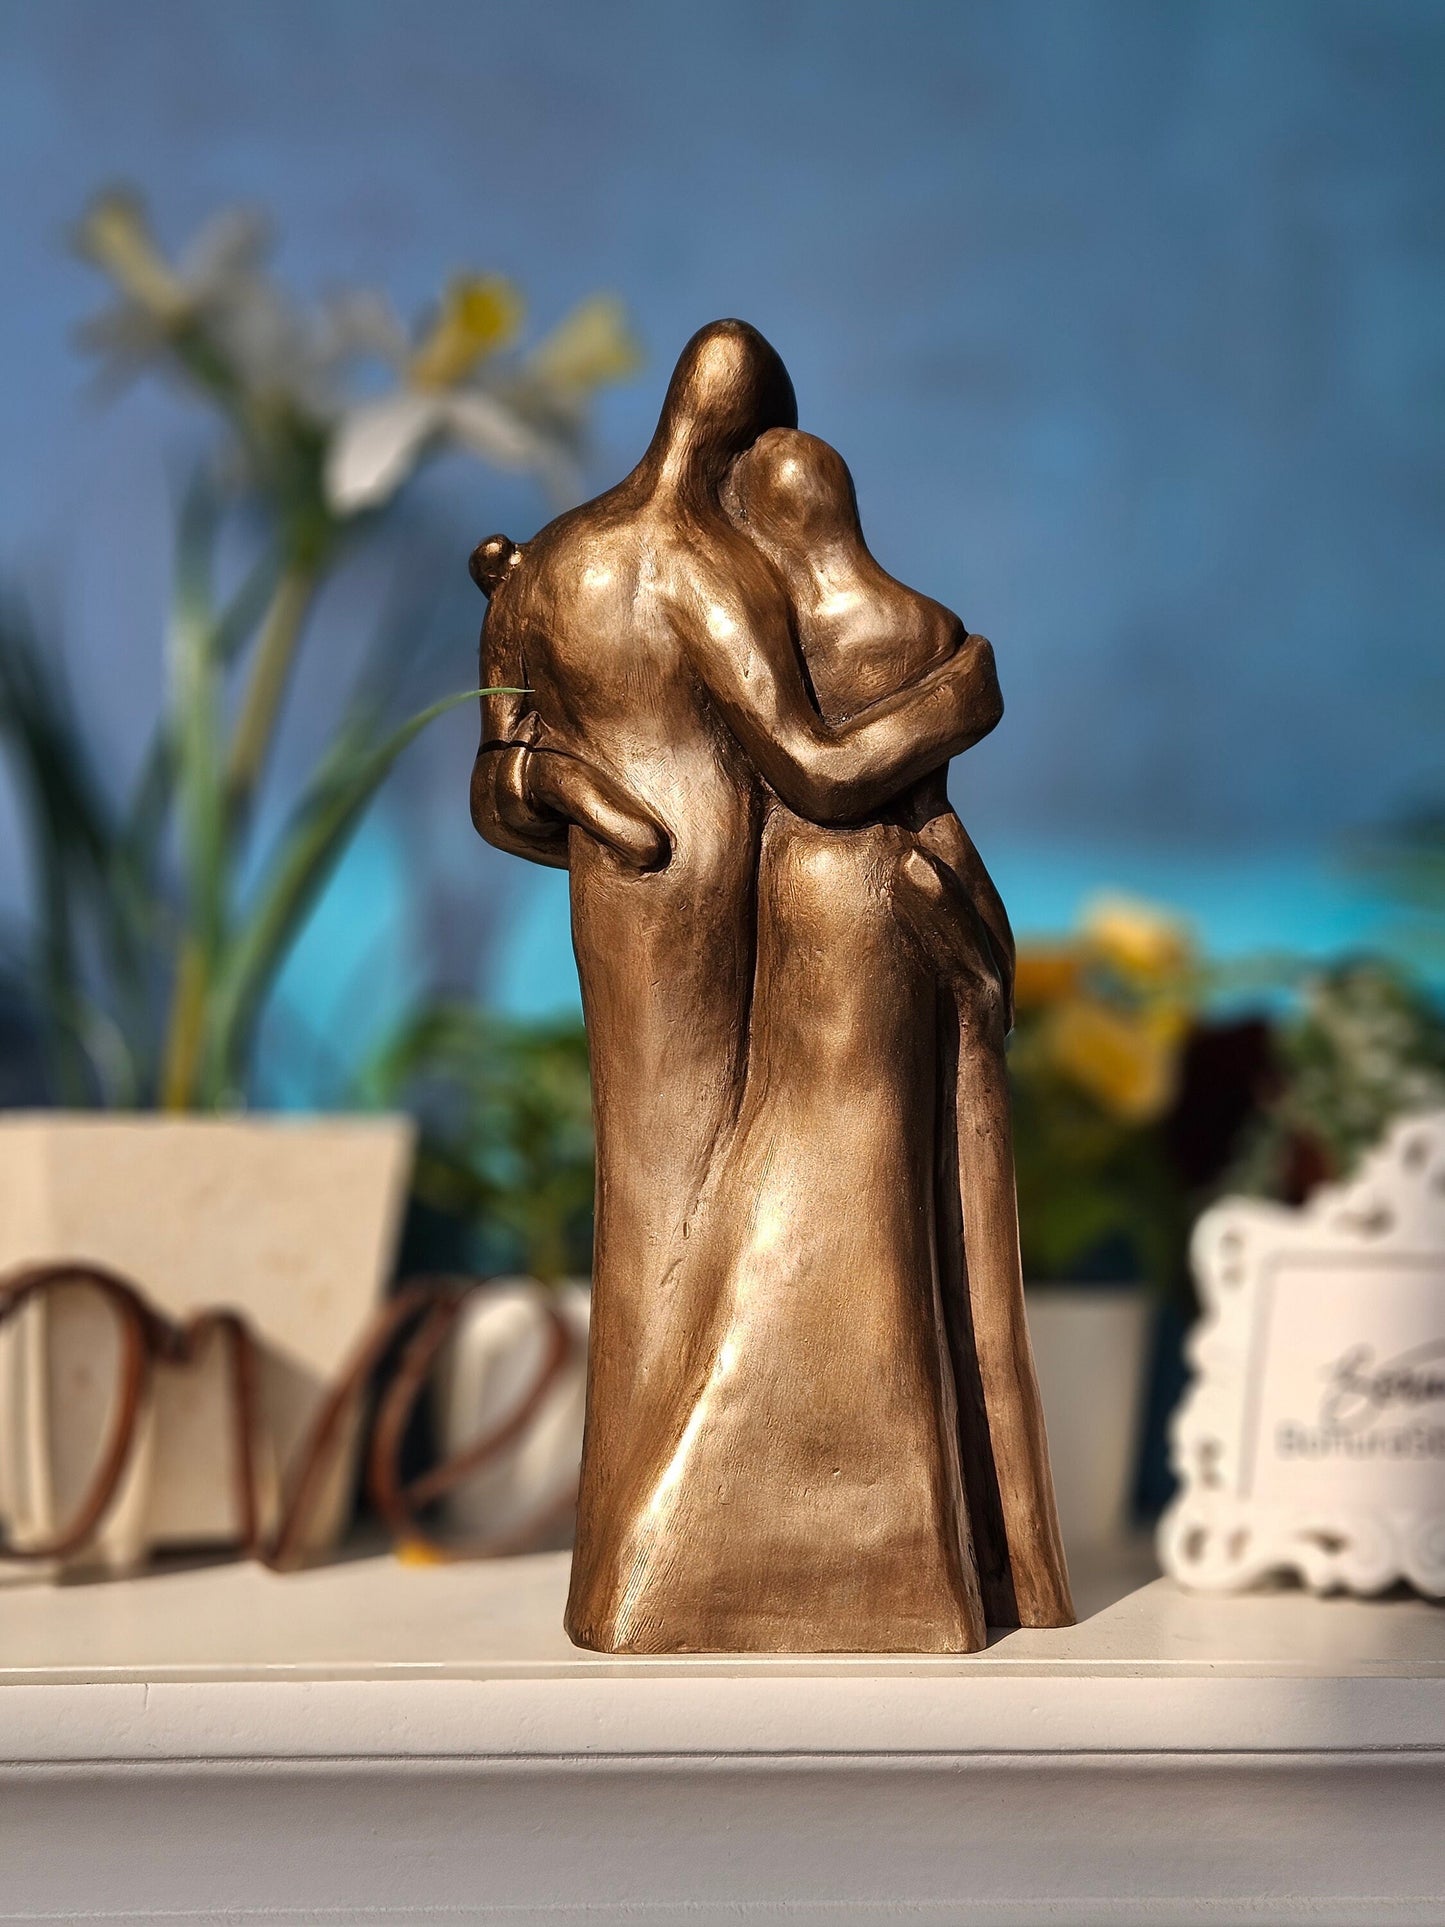 8th Anniversary Family of Four Portrait Sculpture with a Toddler and a Child, Bronze Anniversary Gift 8 Year Gift for Her